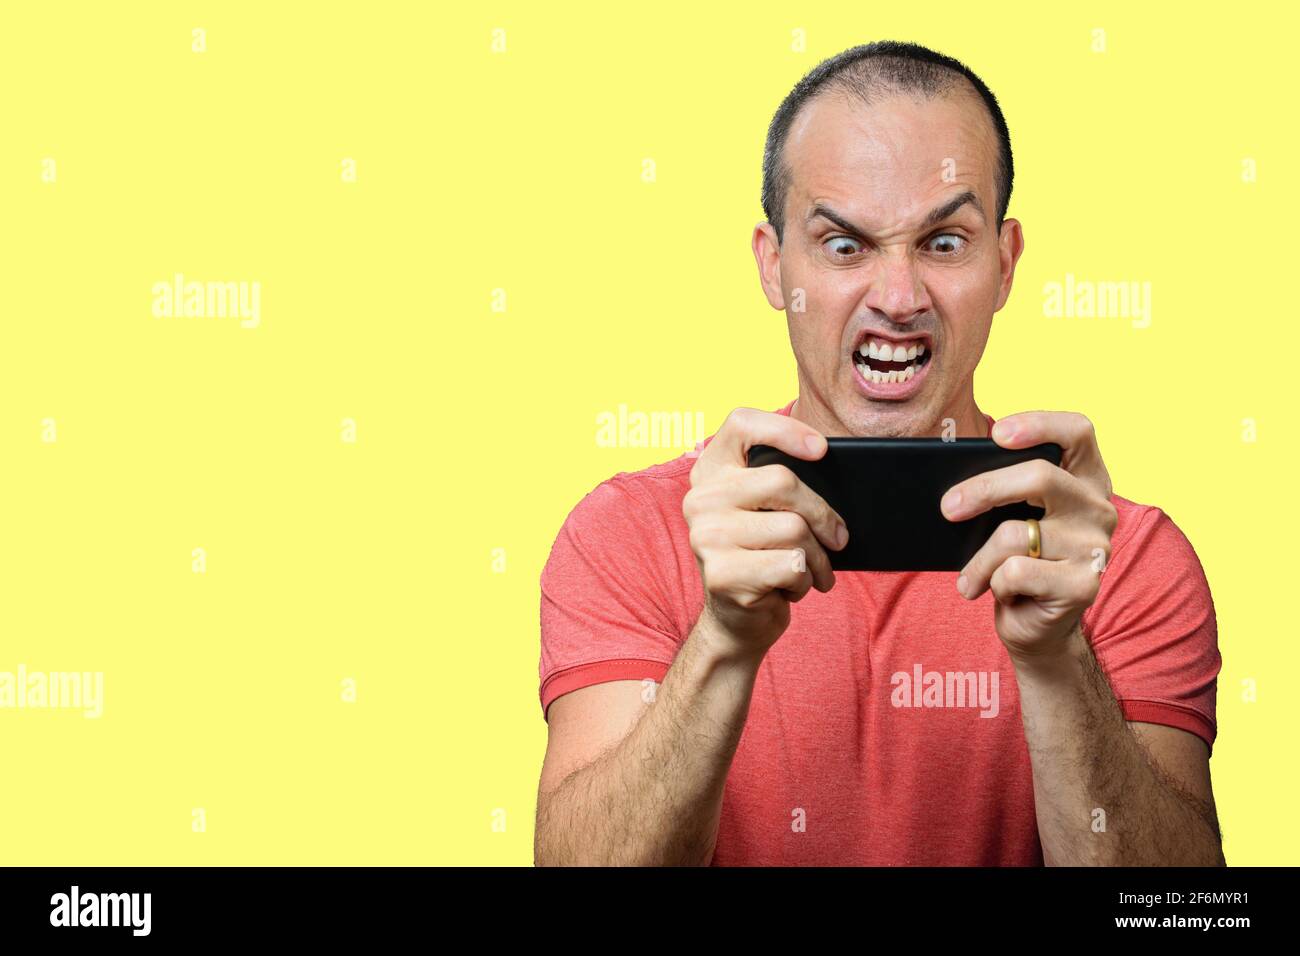 Mature man in casual clothing, with angry expression and holding smartphone horizontally. Yellow background. Stock Photo